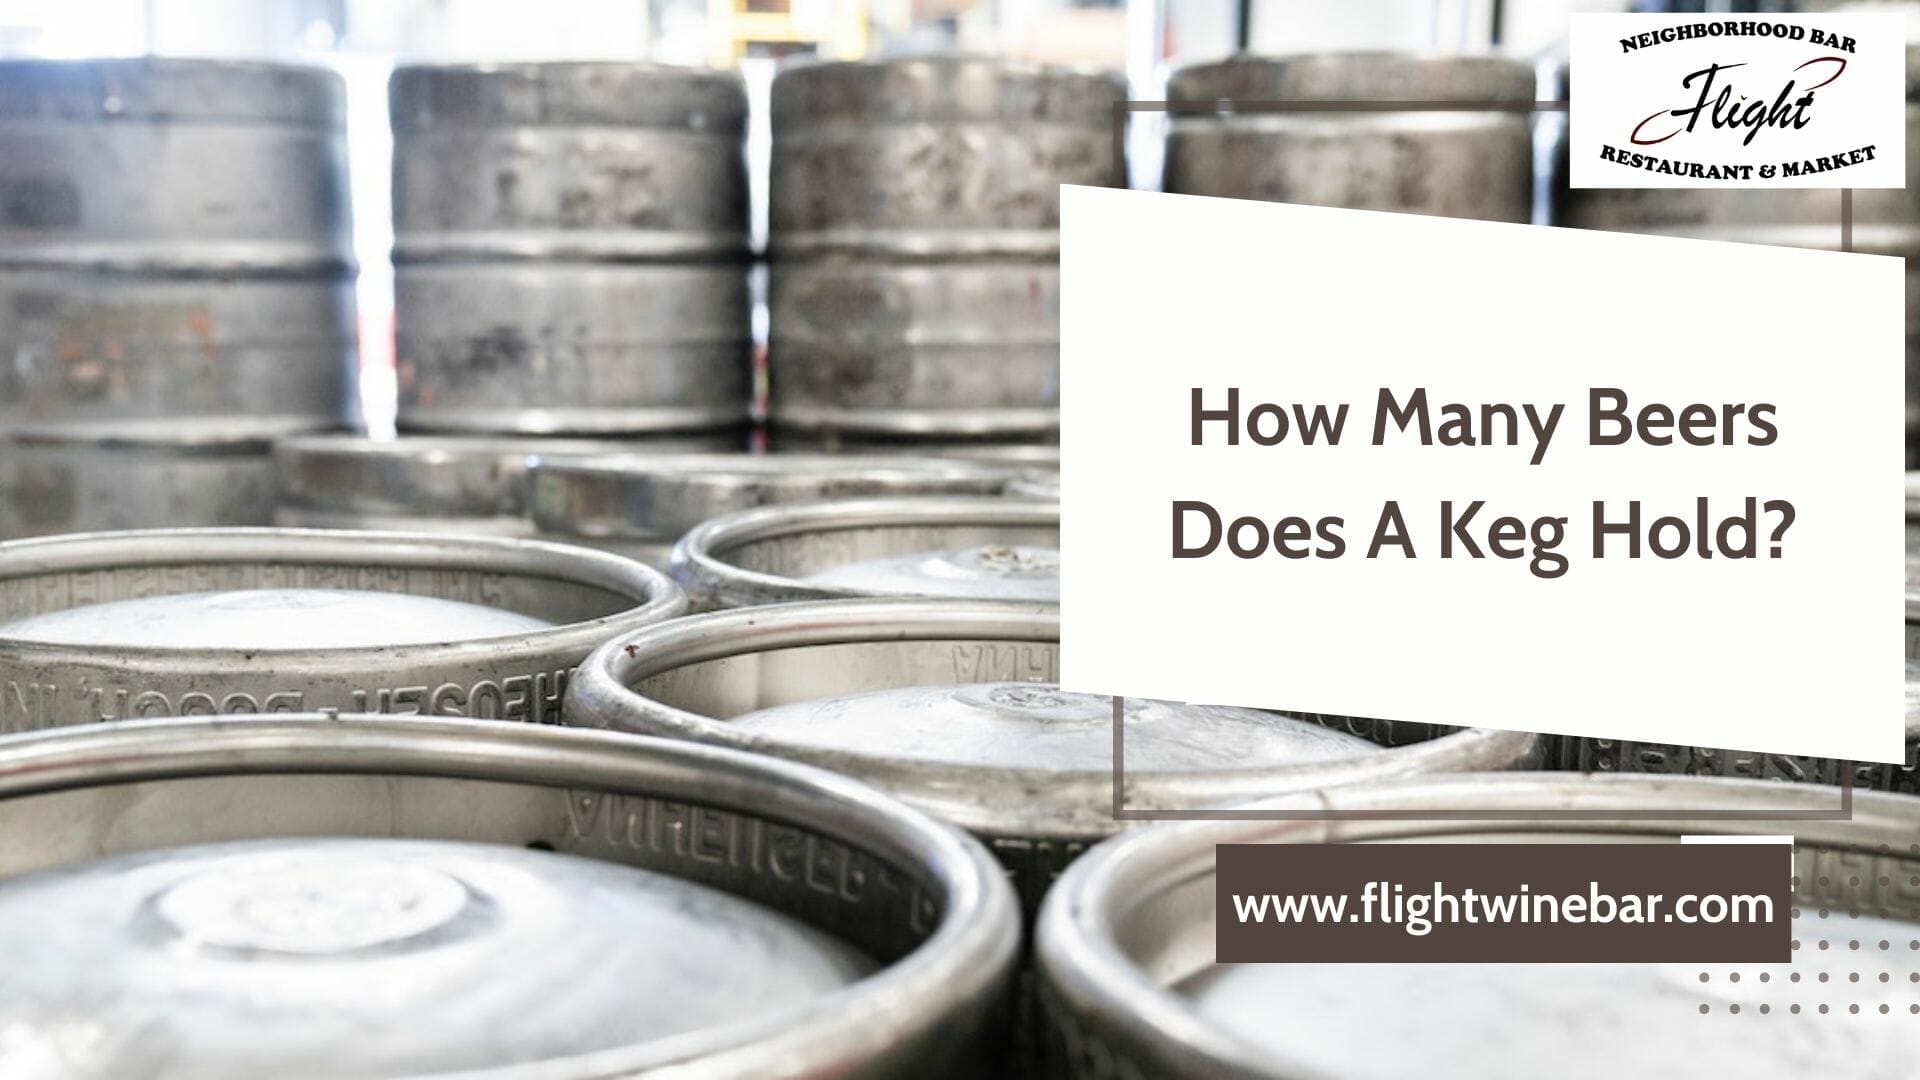 How Many Beers Does A Keg Hold